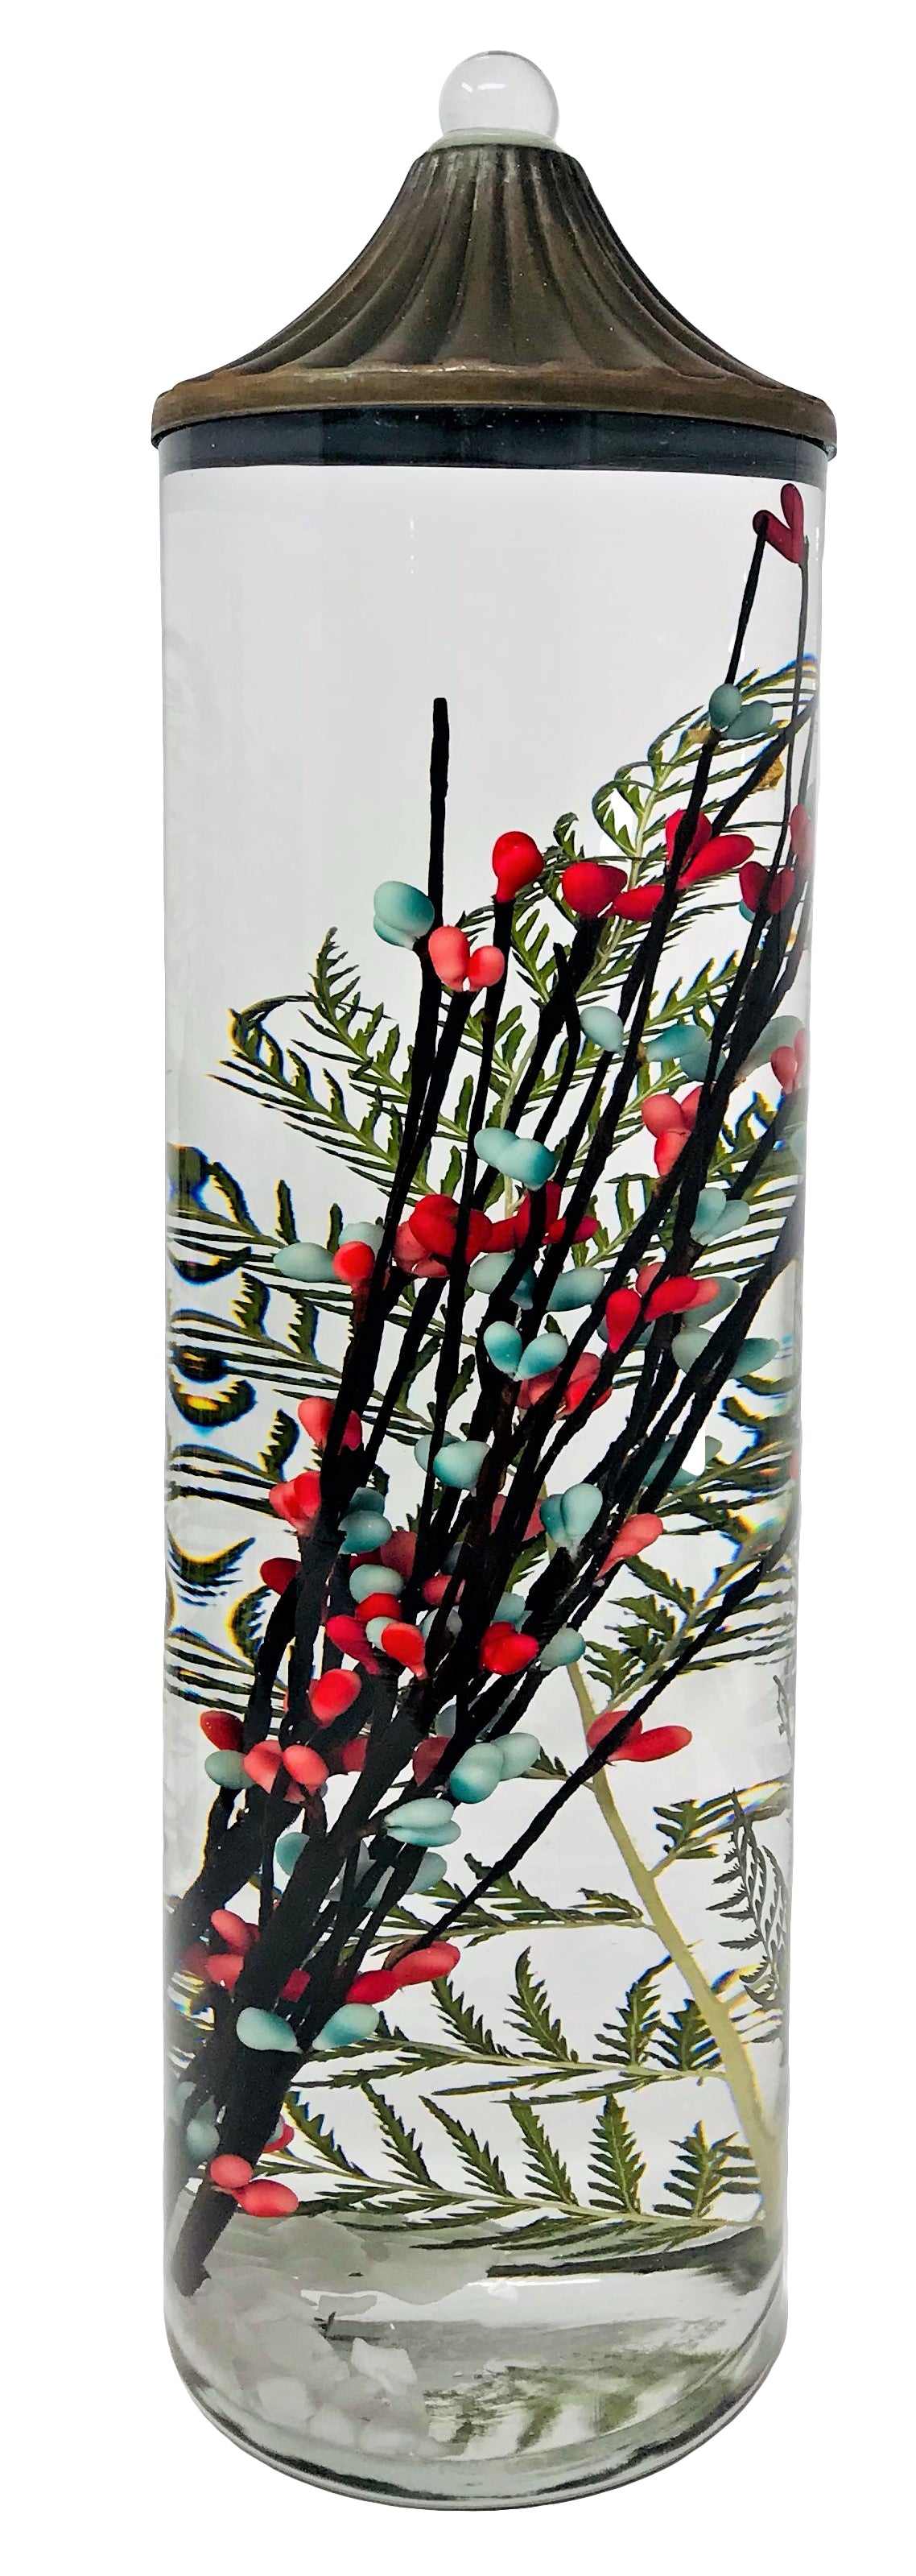 Lifetime Oil Burning "Coral Berry" Theme Candles